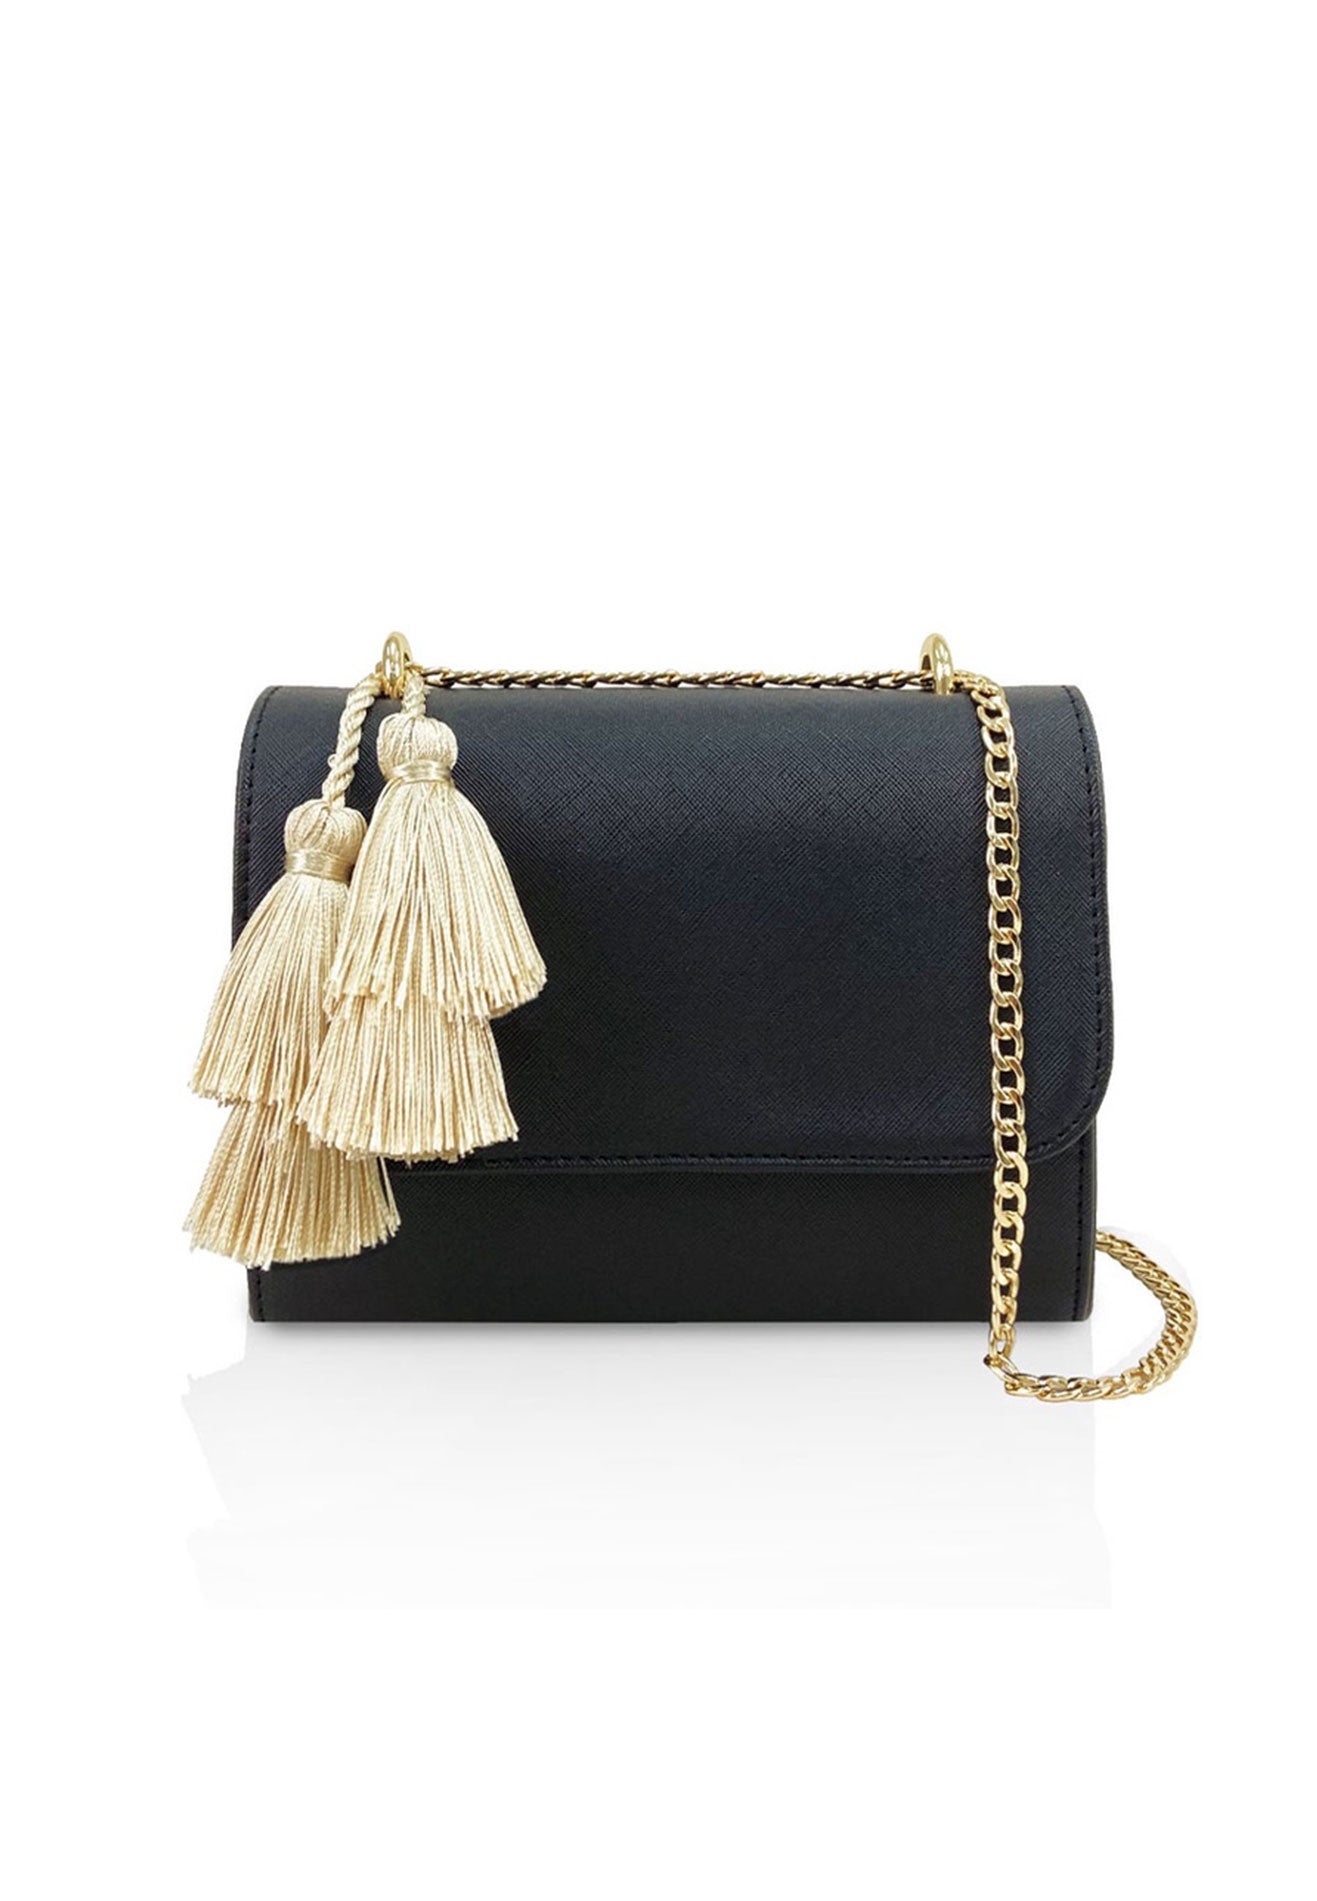 VOIR Small Boxy with Tassels Crossbody Bag